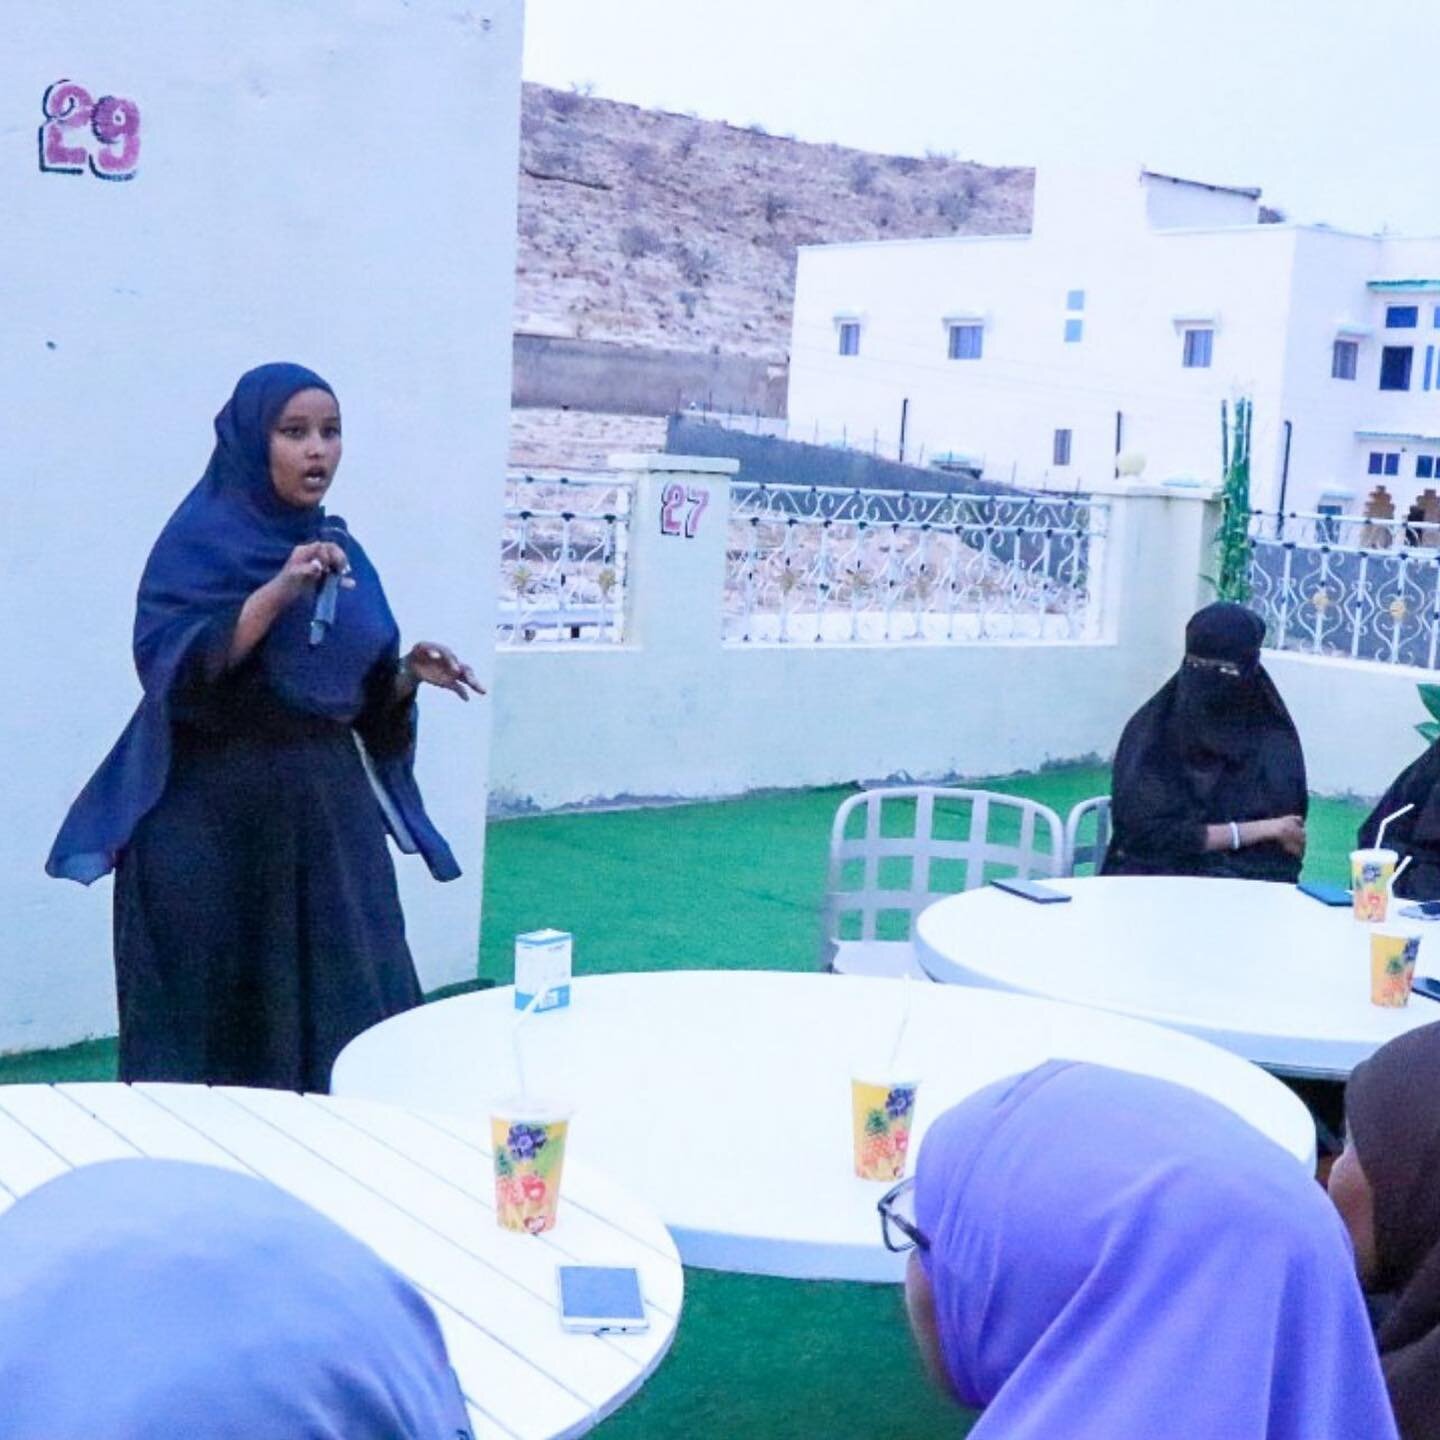 We are excited to share with you pictures from the annual event in #LasAnod to find the future female leaders of education. ⁠⠀
Our GTLTG team on the ground continue to do phenomenal work in order to find qualified candidates, who will receive full sc